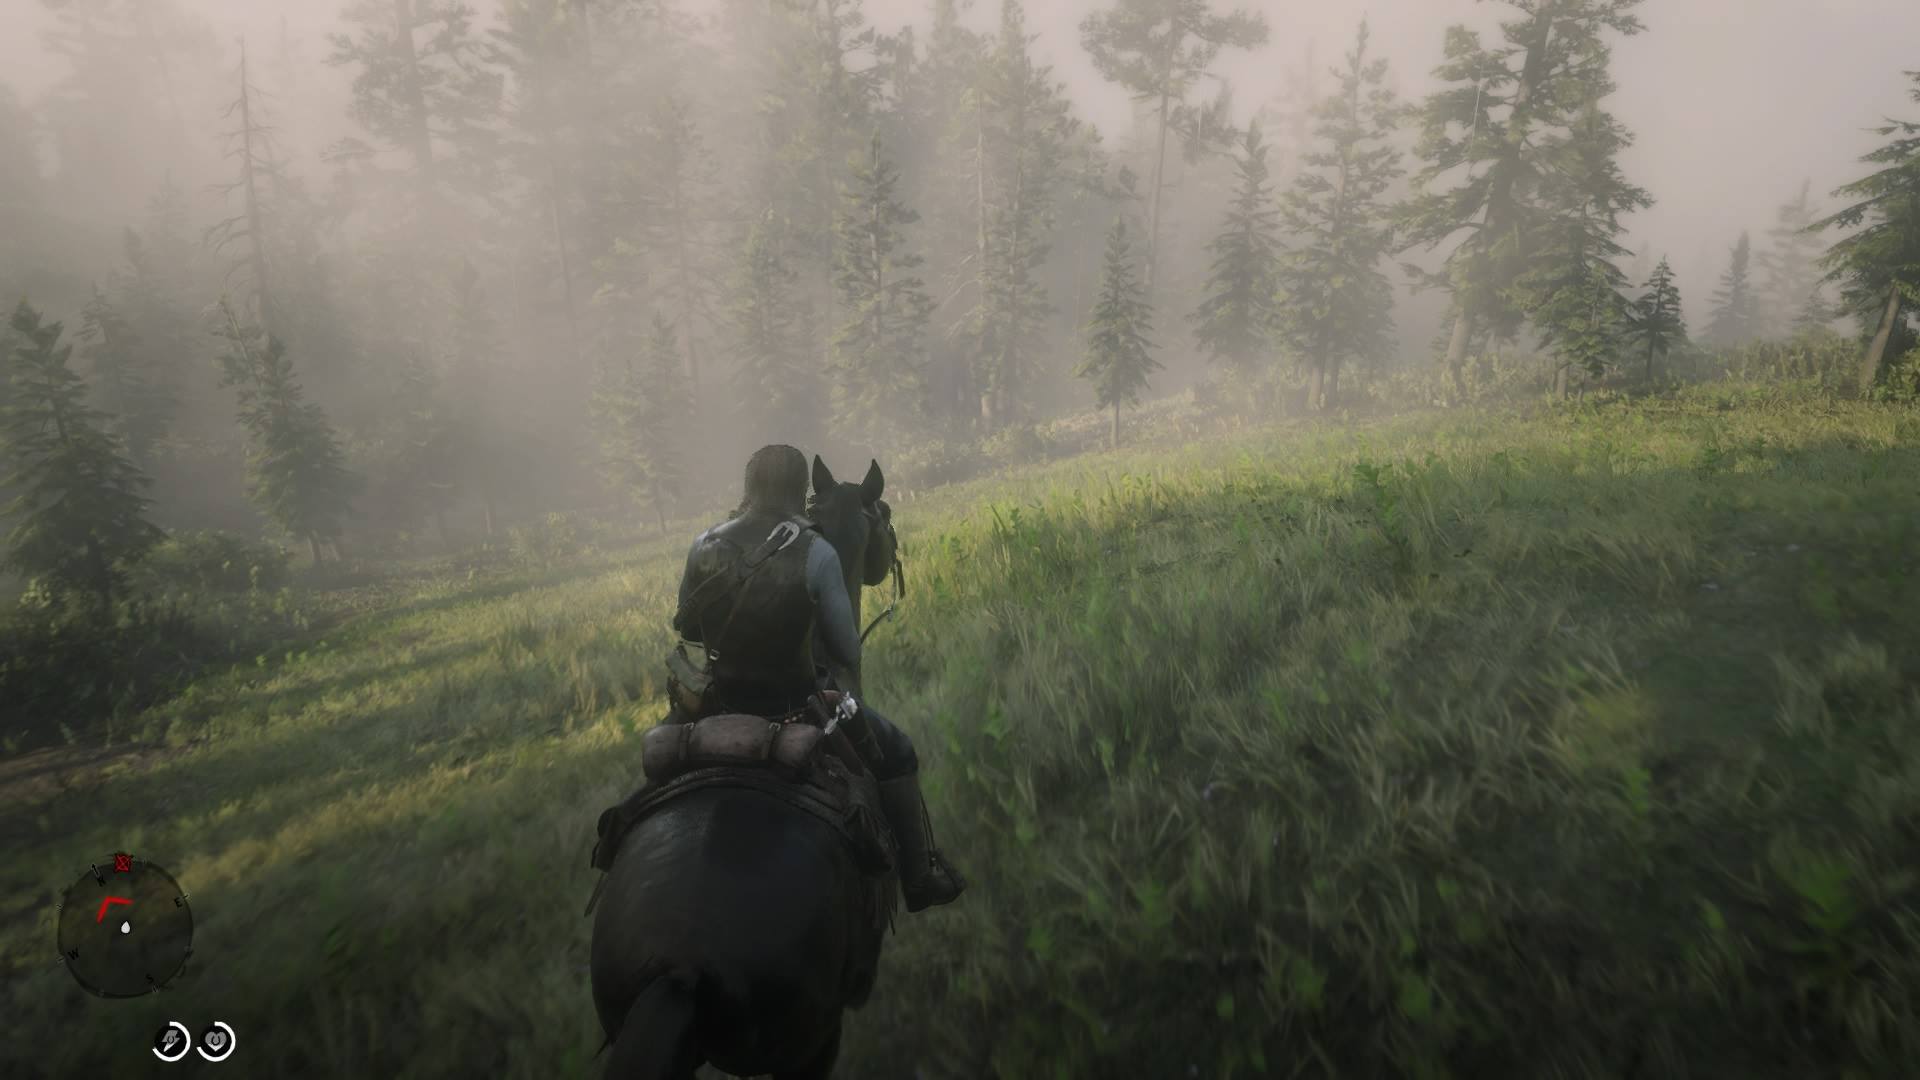 Red Dead Redemption 2: Want to know where you're going but blaze your own trail? Use the compass.